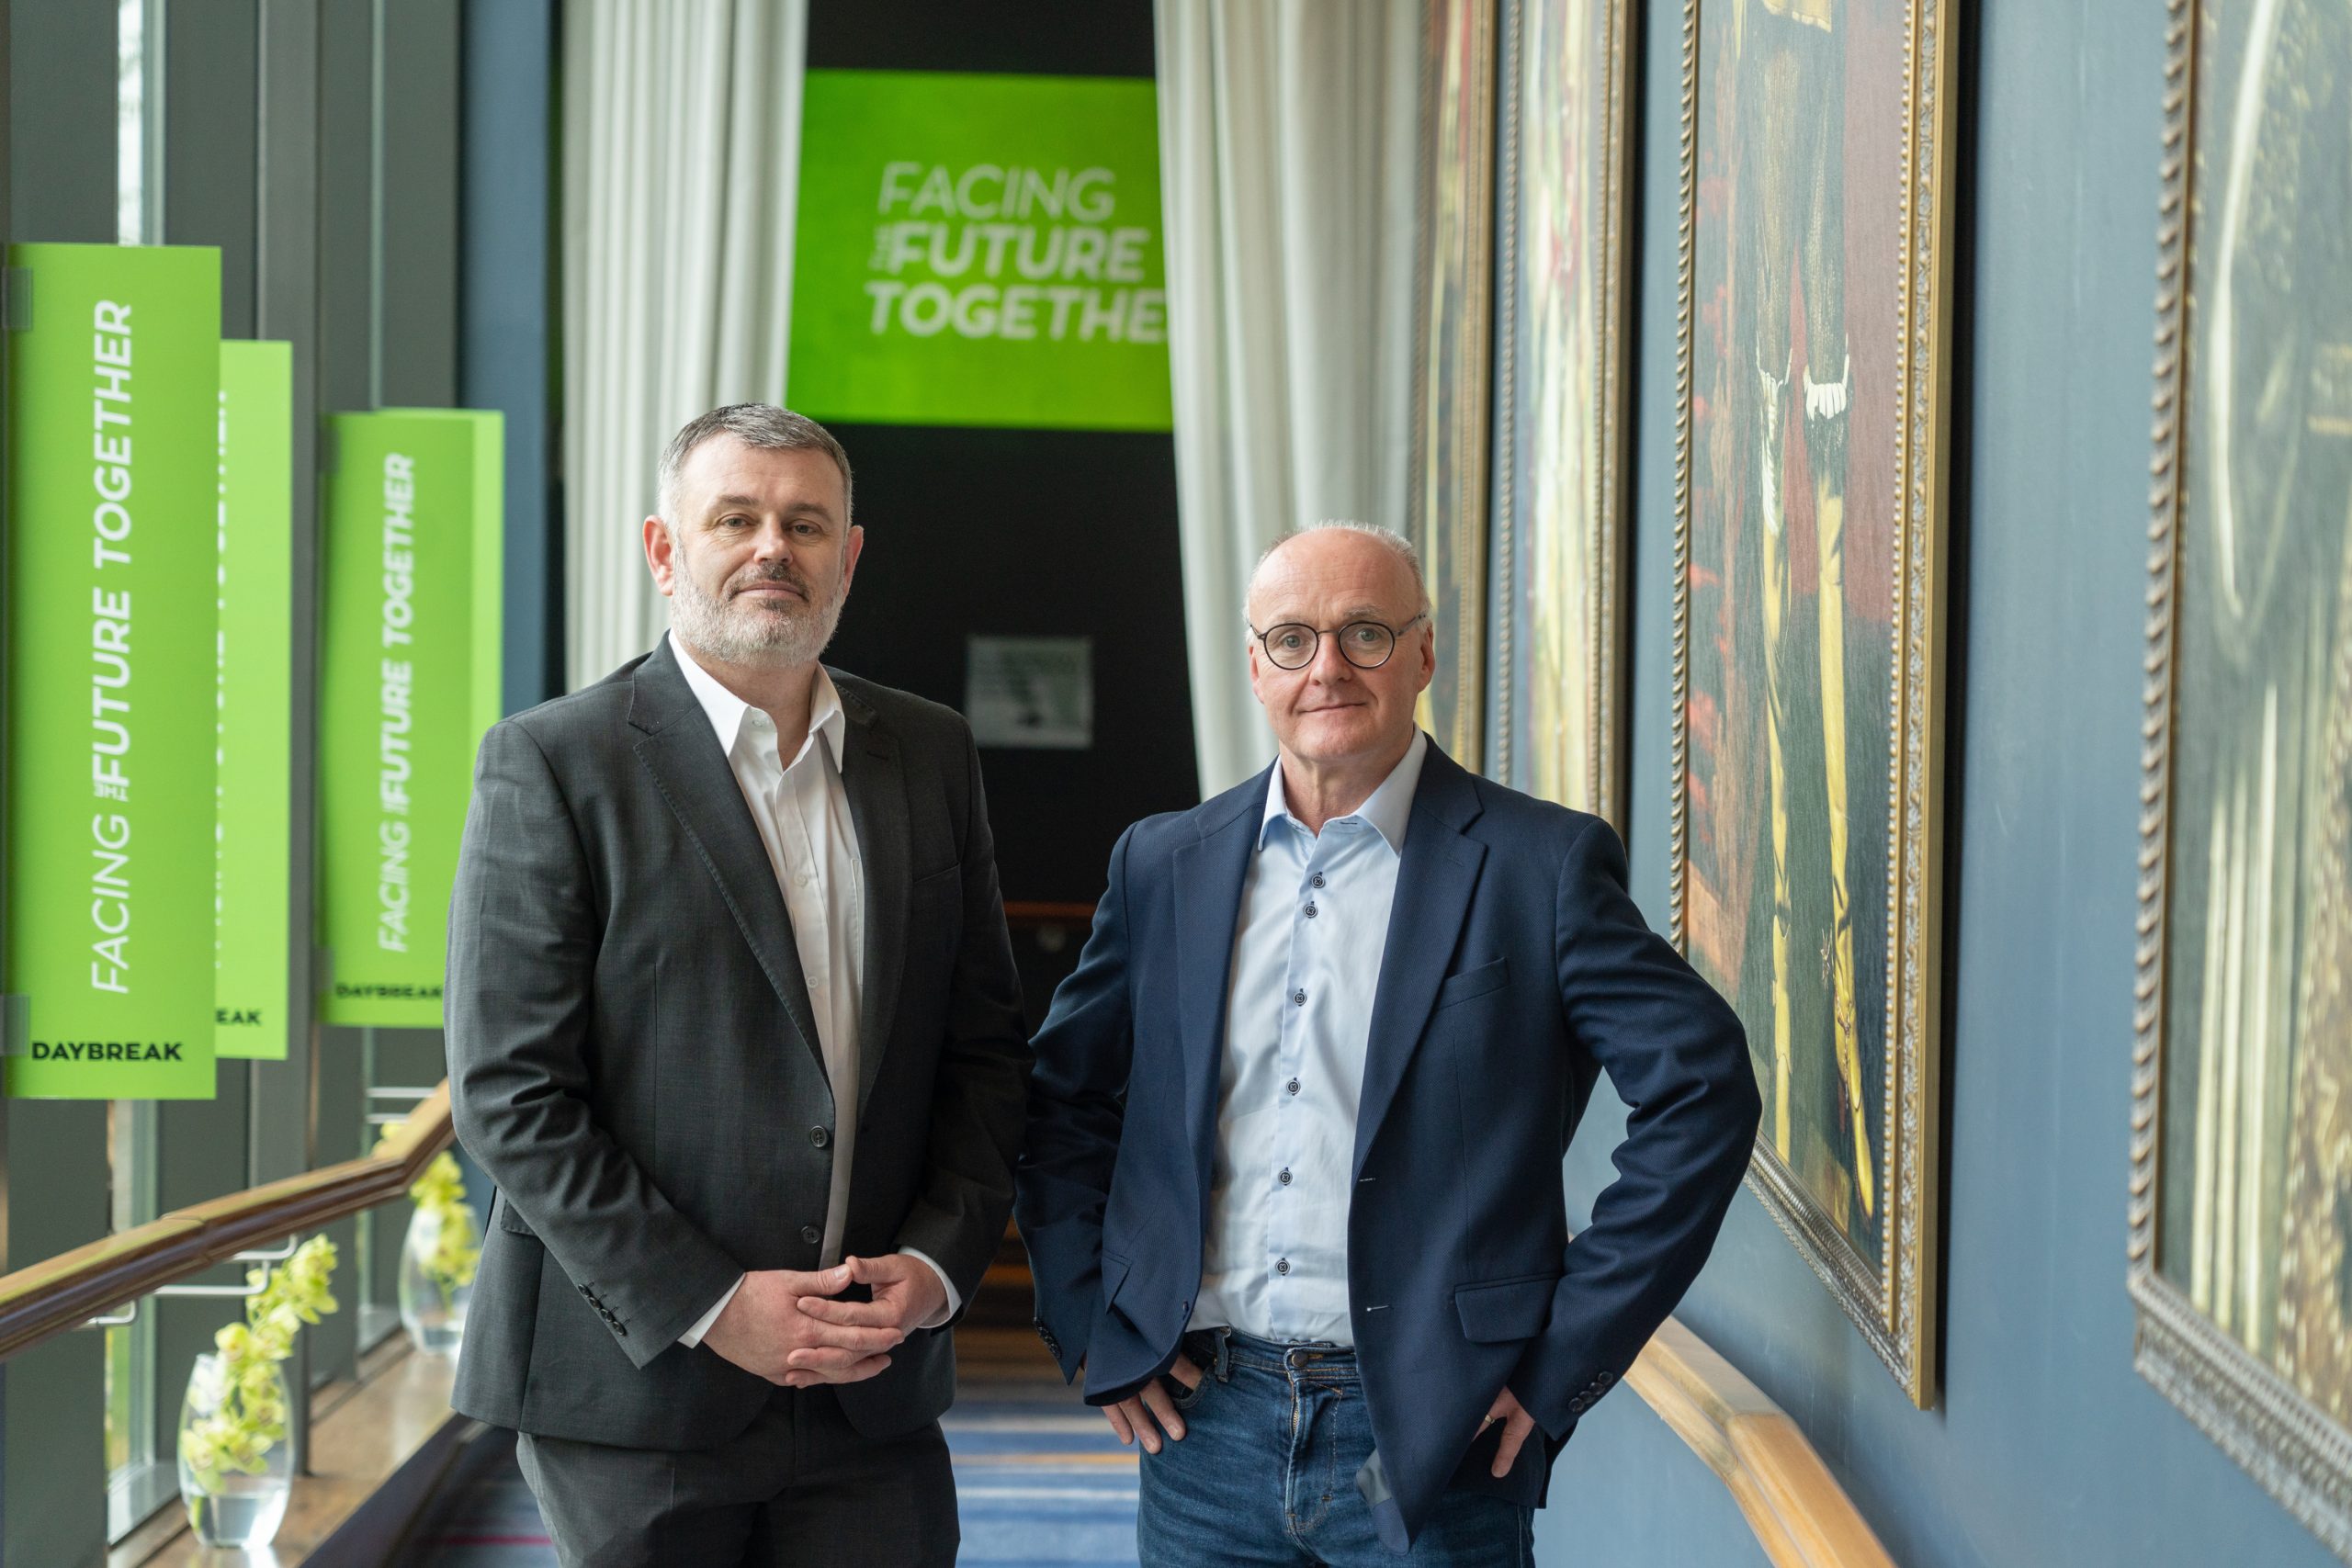 Daybreak to open 37 new stores supporting 500 jobs in €8 million expansion for 2023